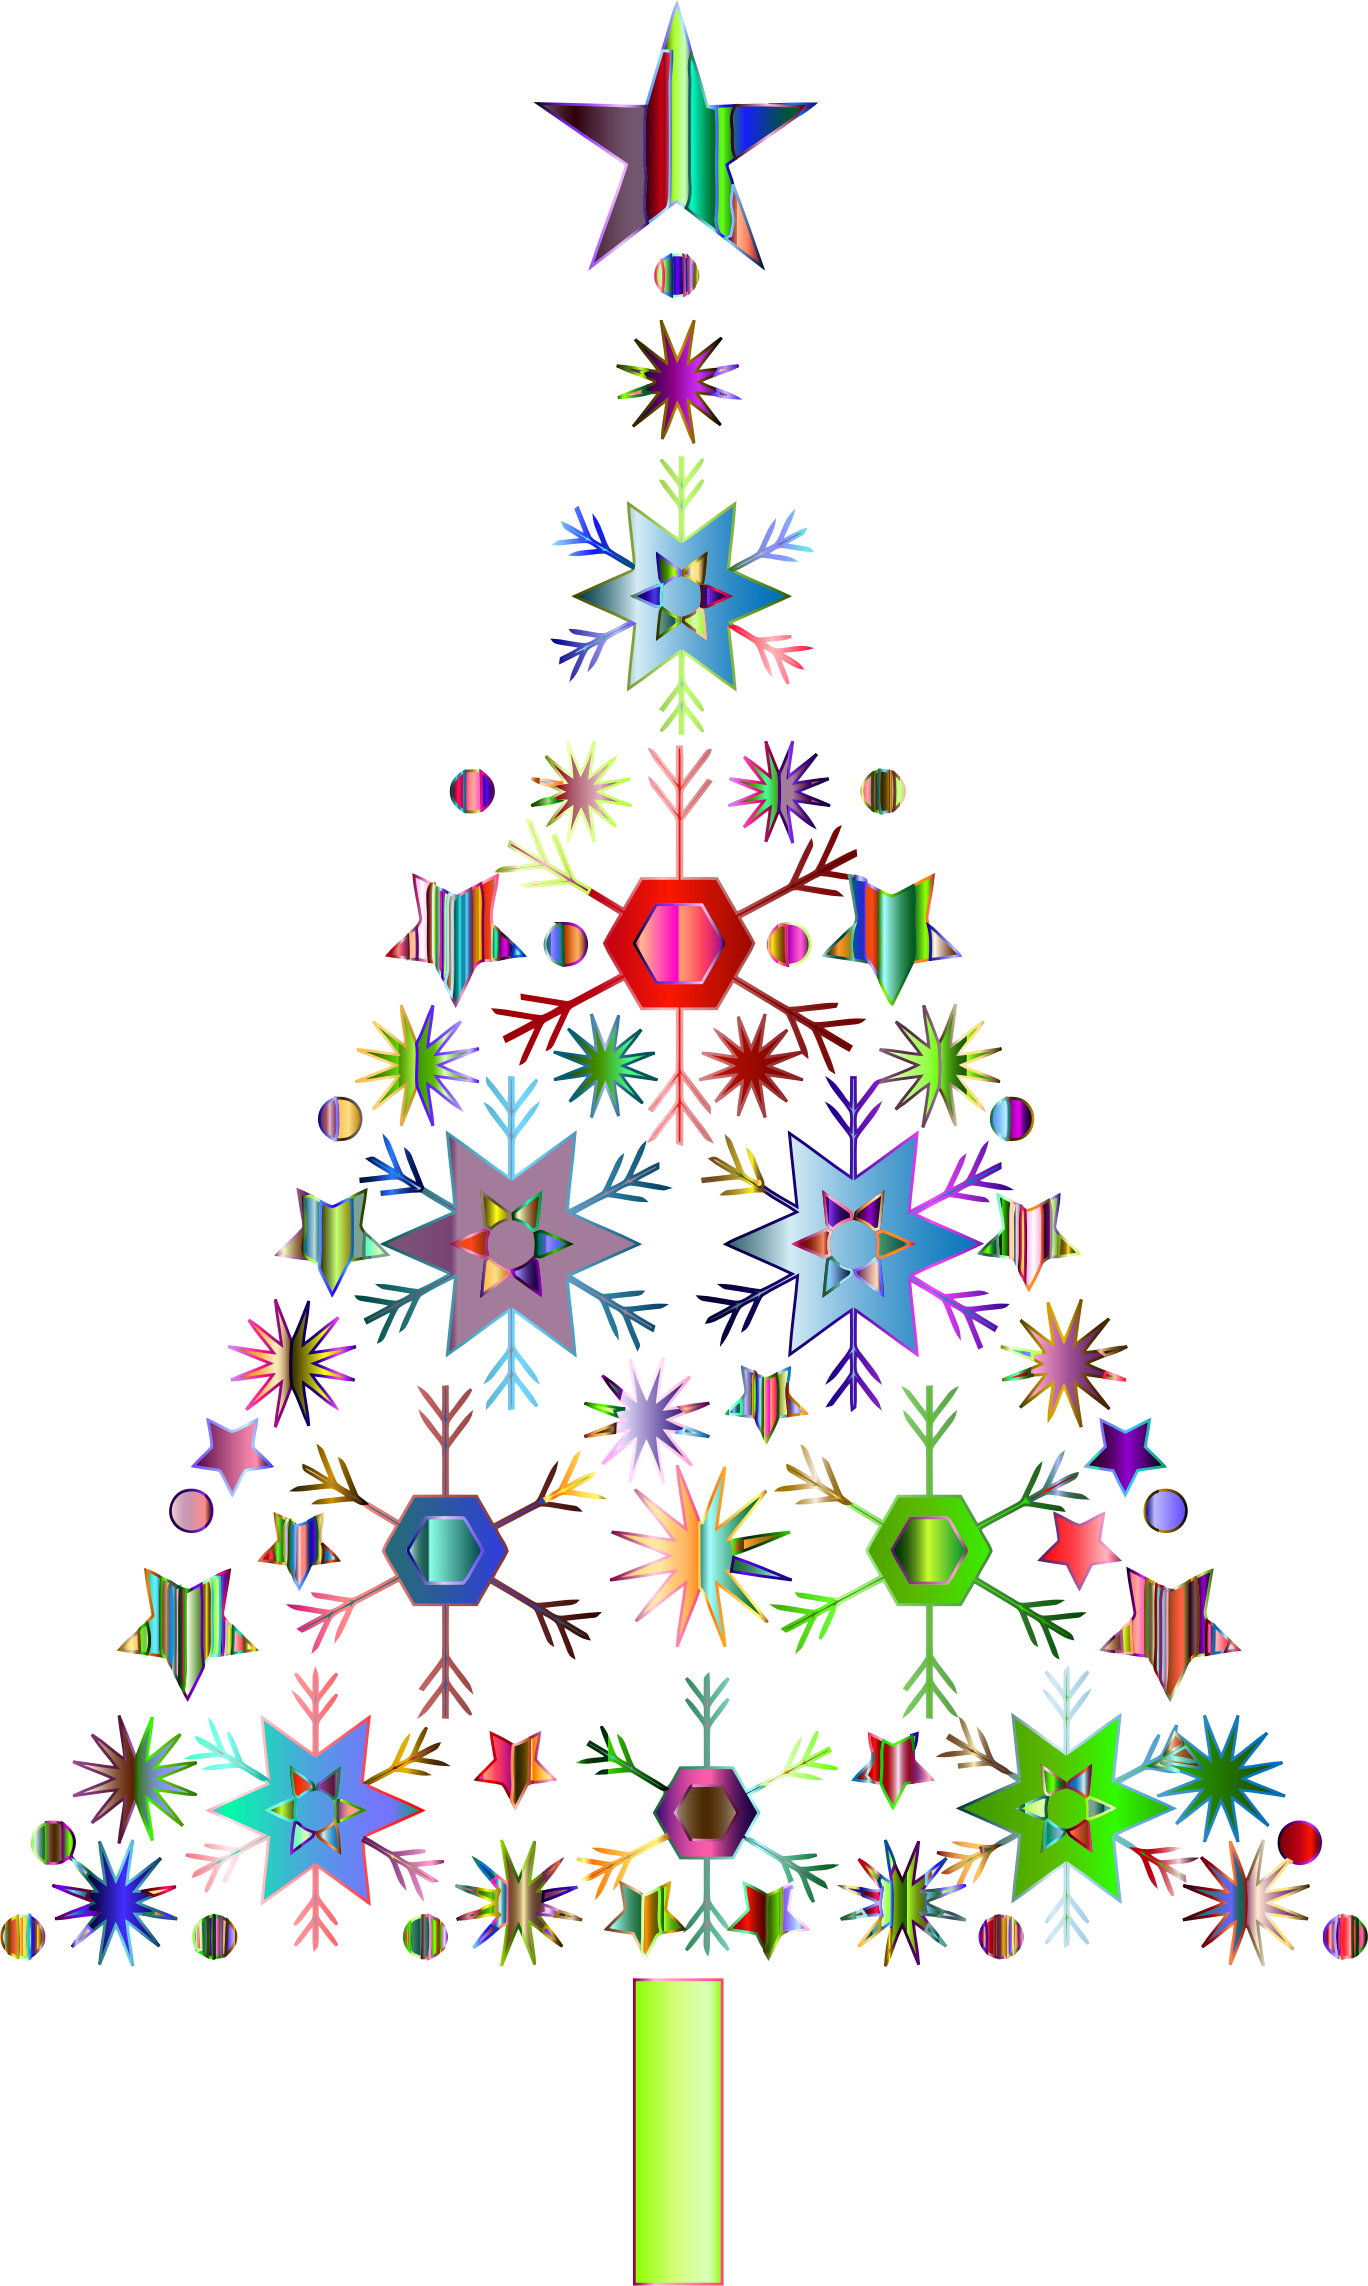 Abstract christmas tree by. Holiday clipart snowflake